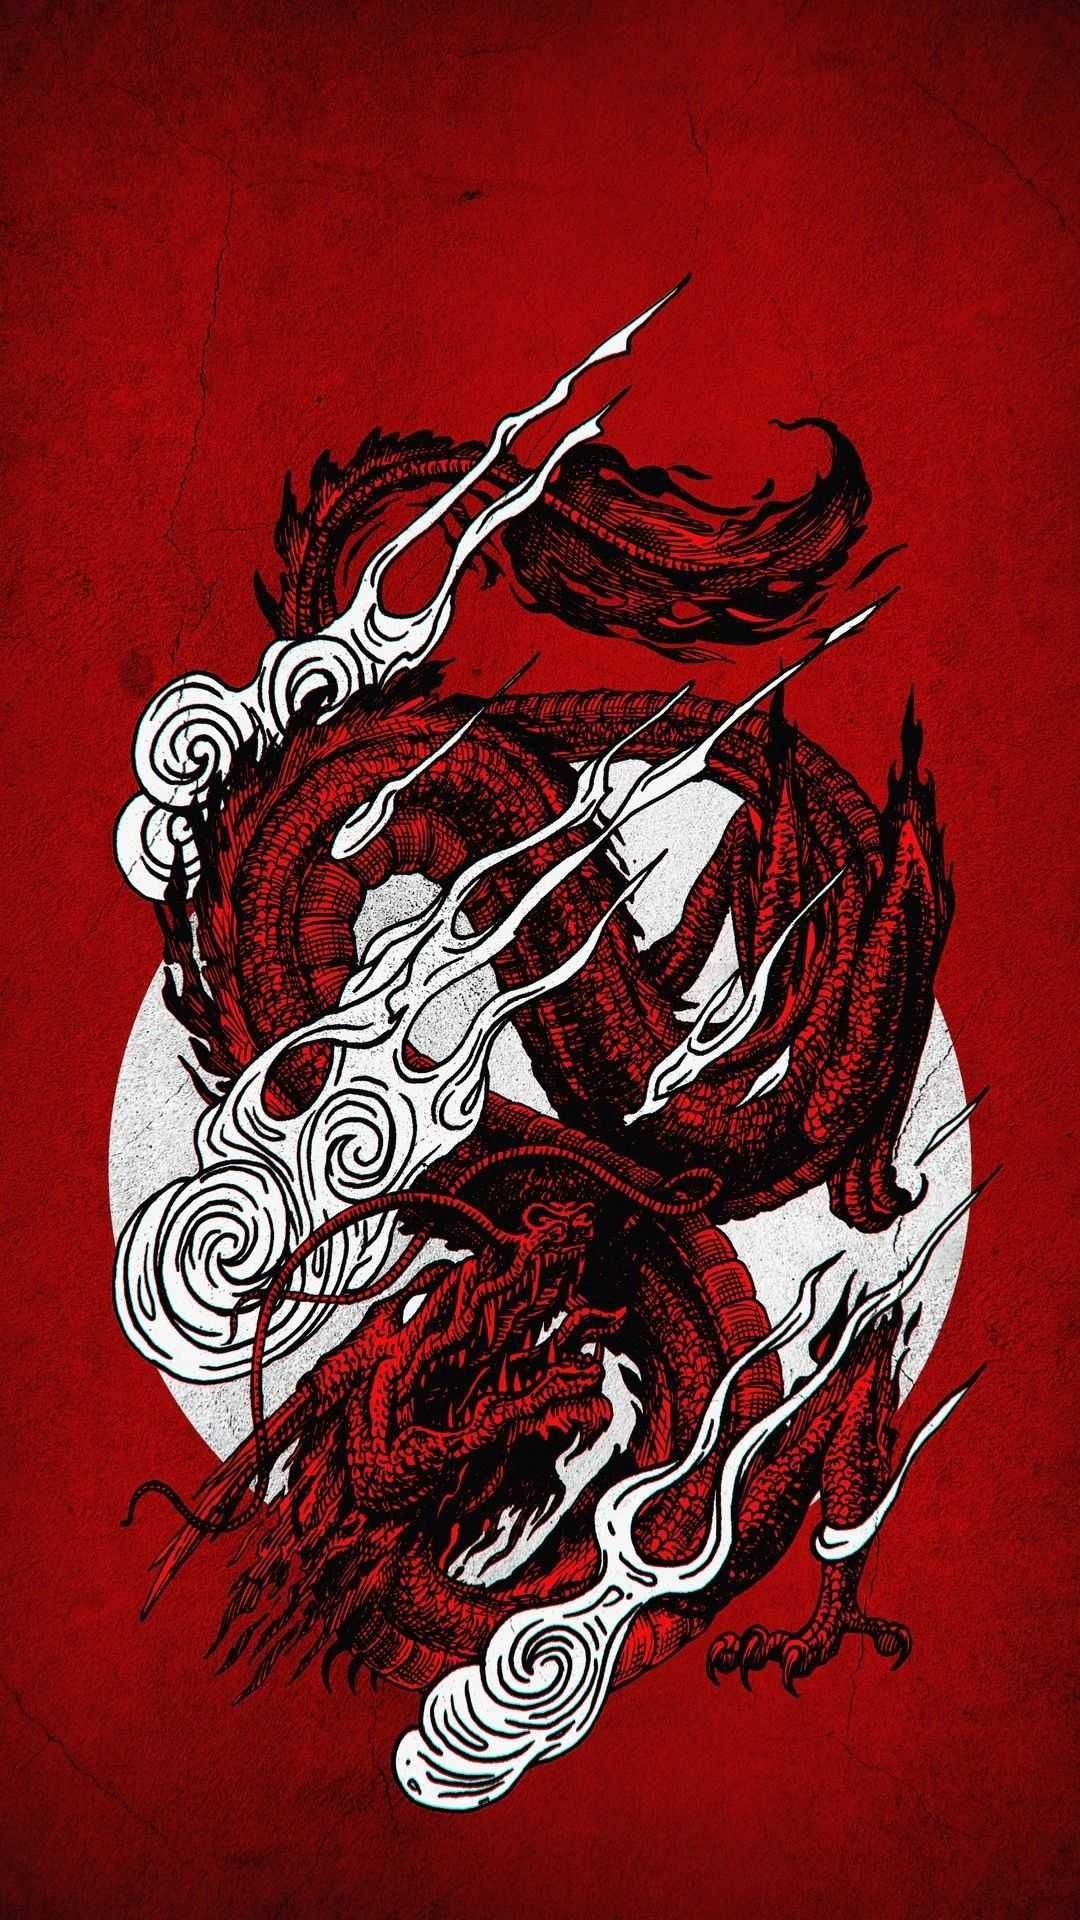 Cool Dragons SymbolsWallpapers